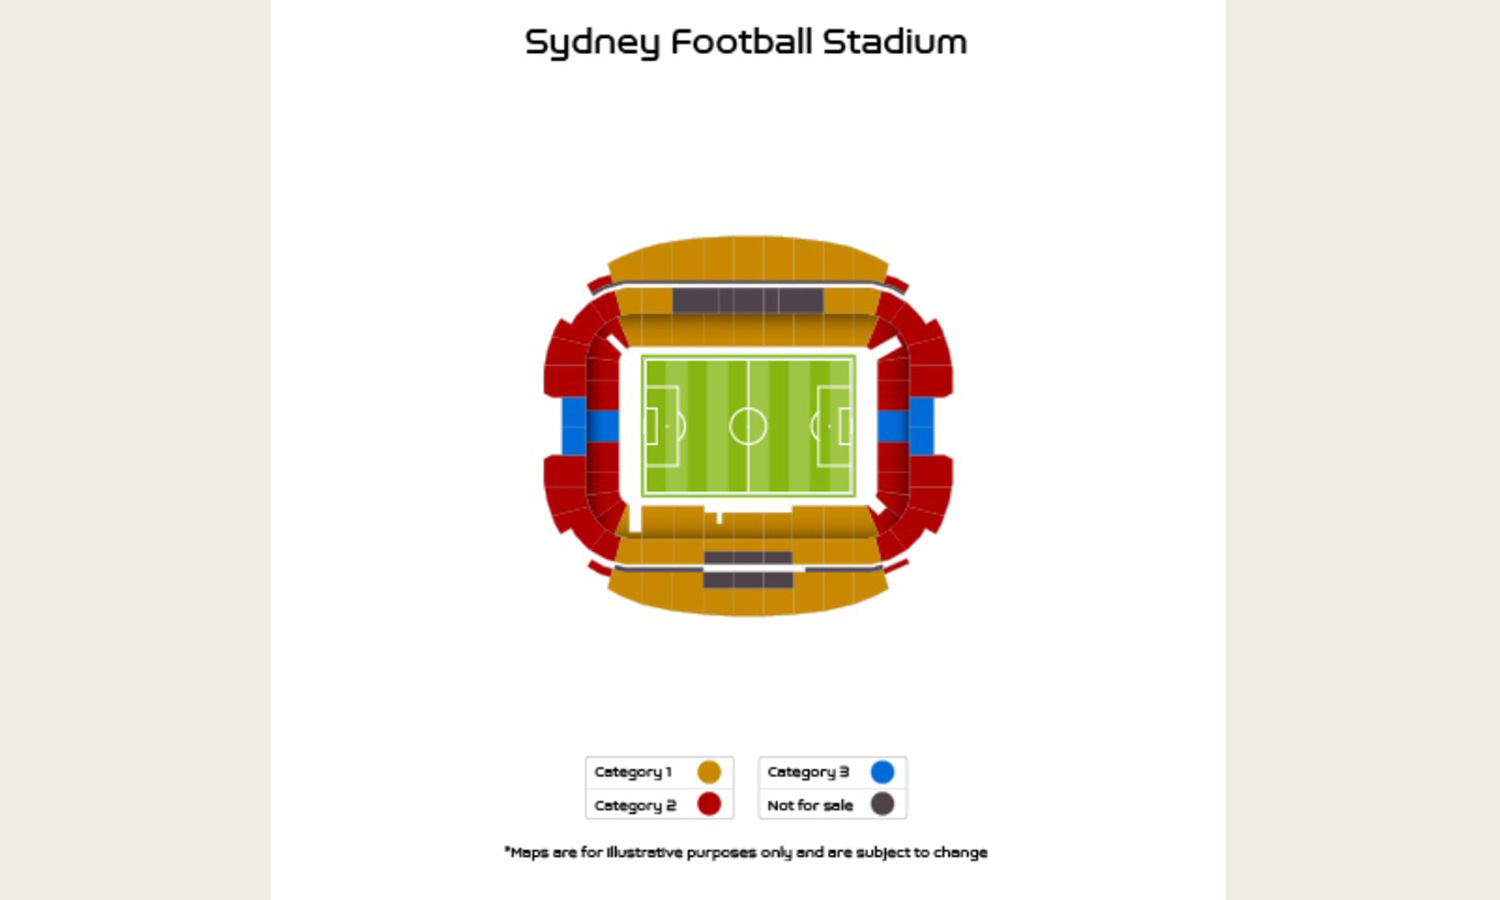 Seating plan for Sydney Football Stadium for the Fifa women's world cup 2023.